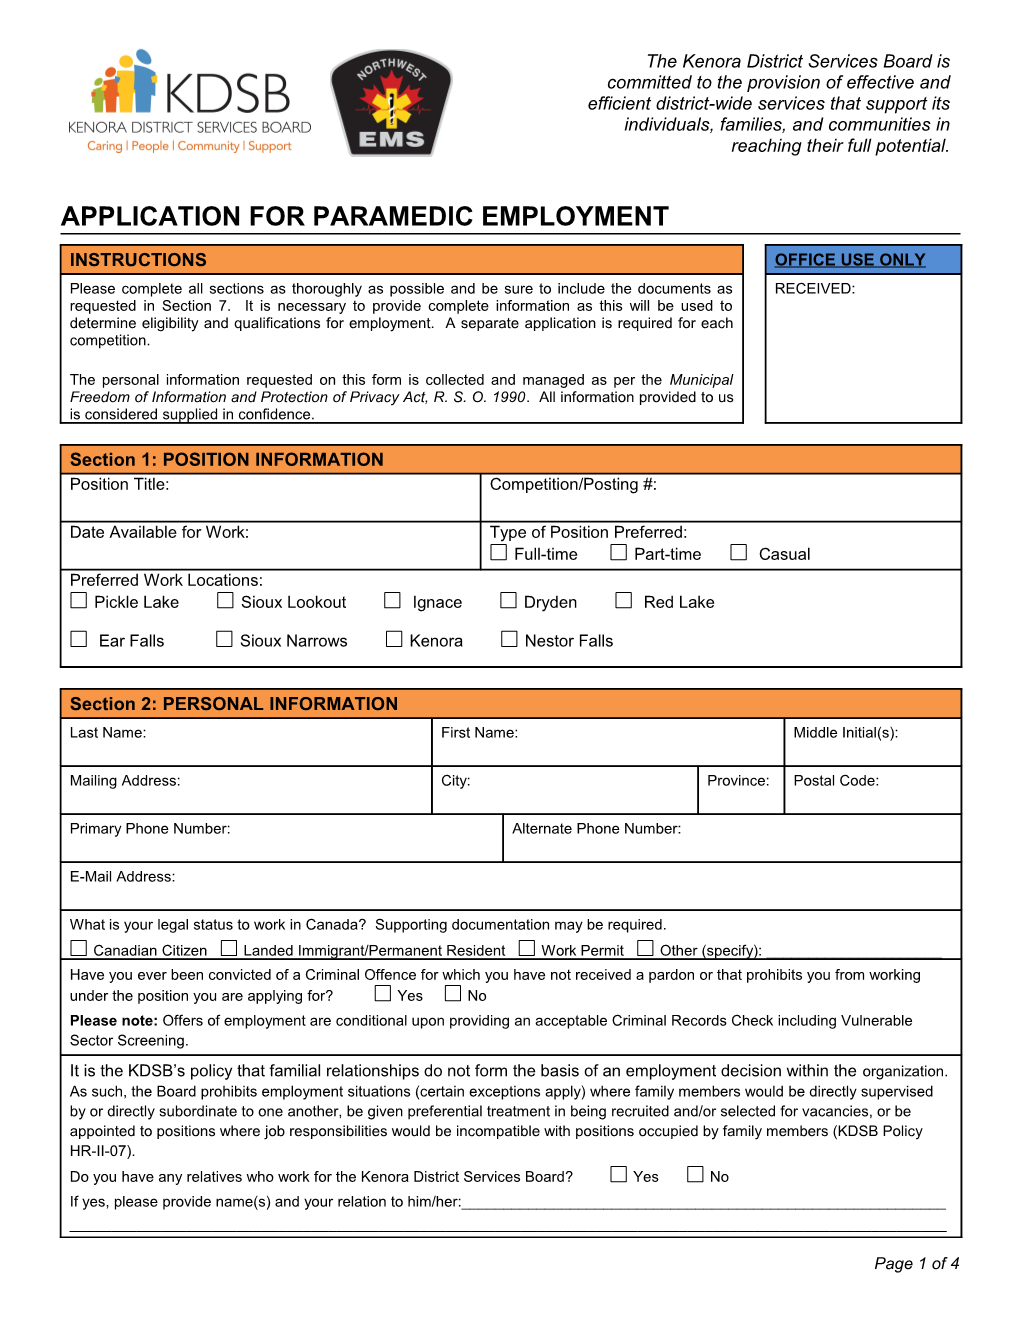 Application for Paramedic Employment